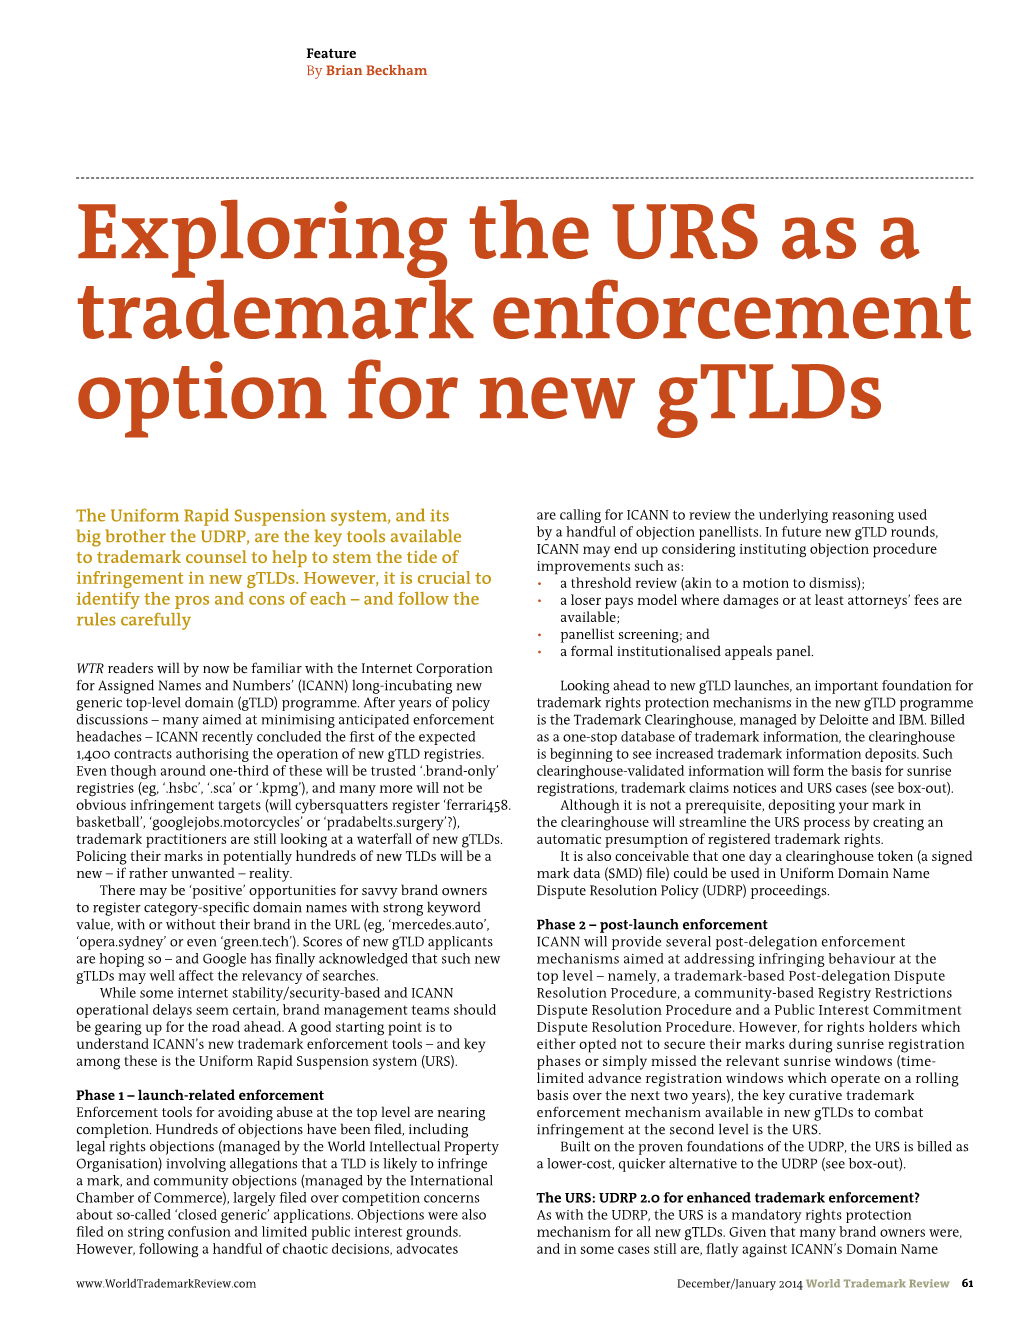 Exploring the URS As a Trademark Enforcement Option for New Gtlds